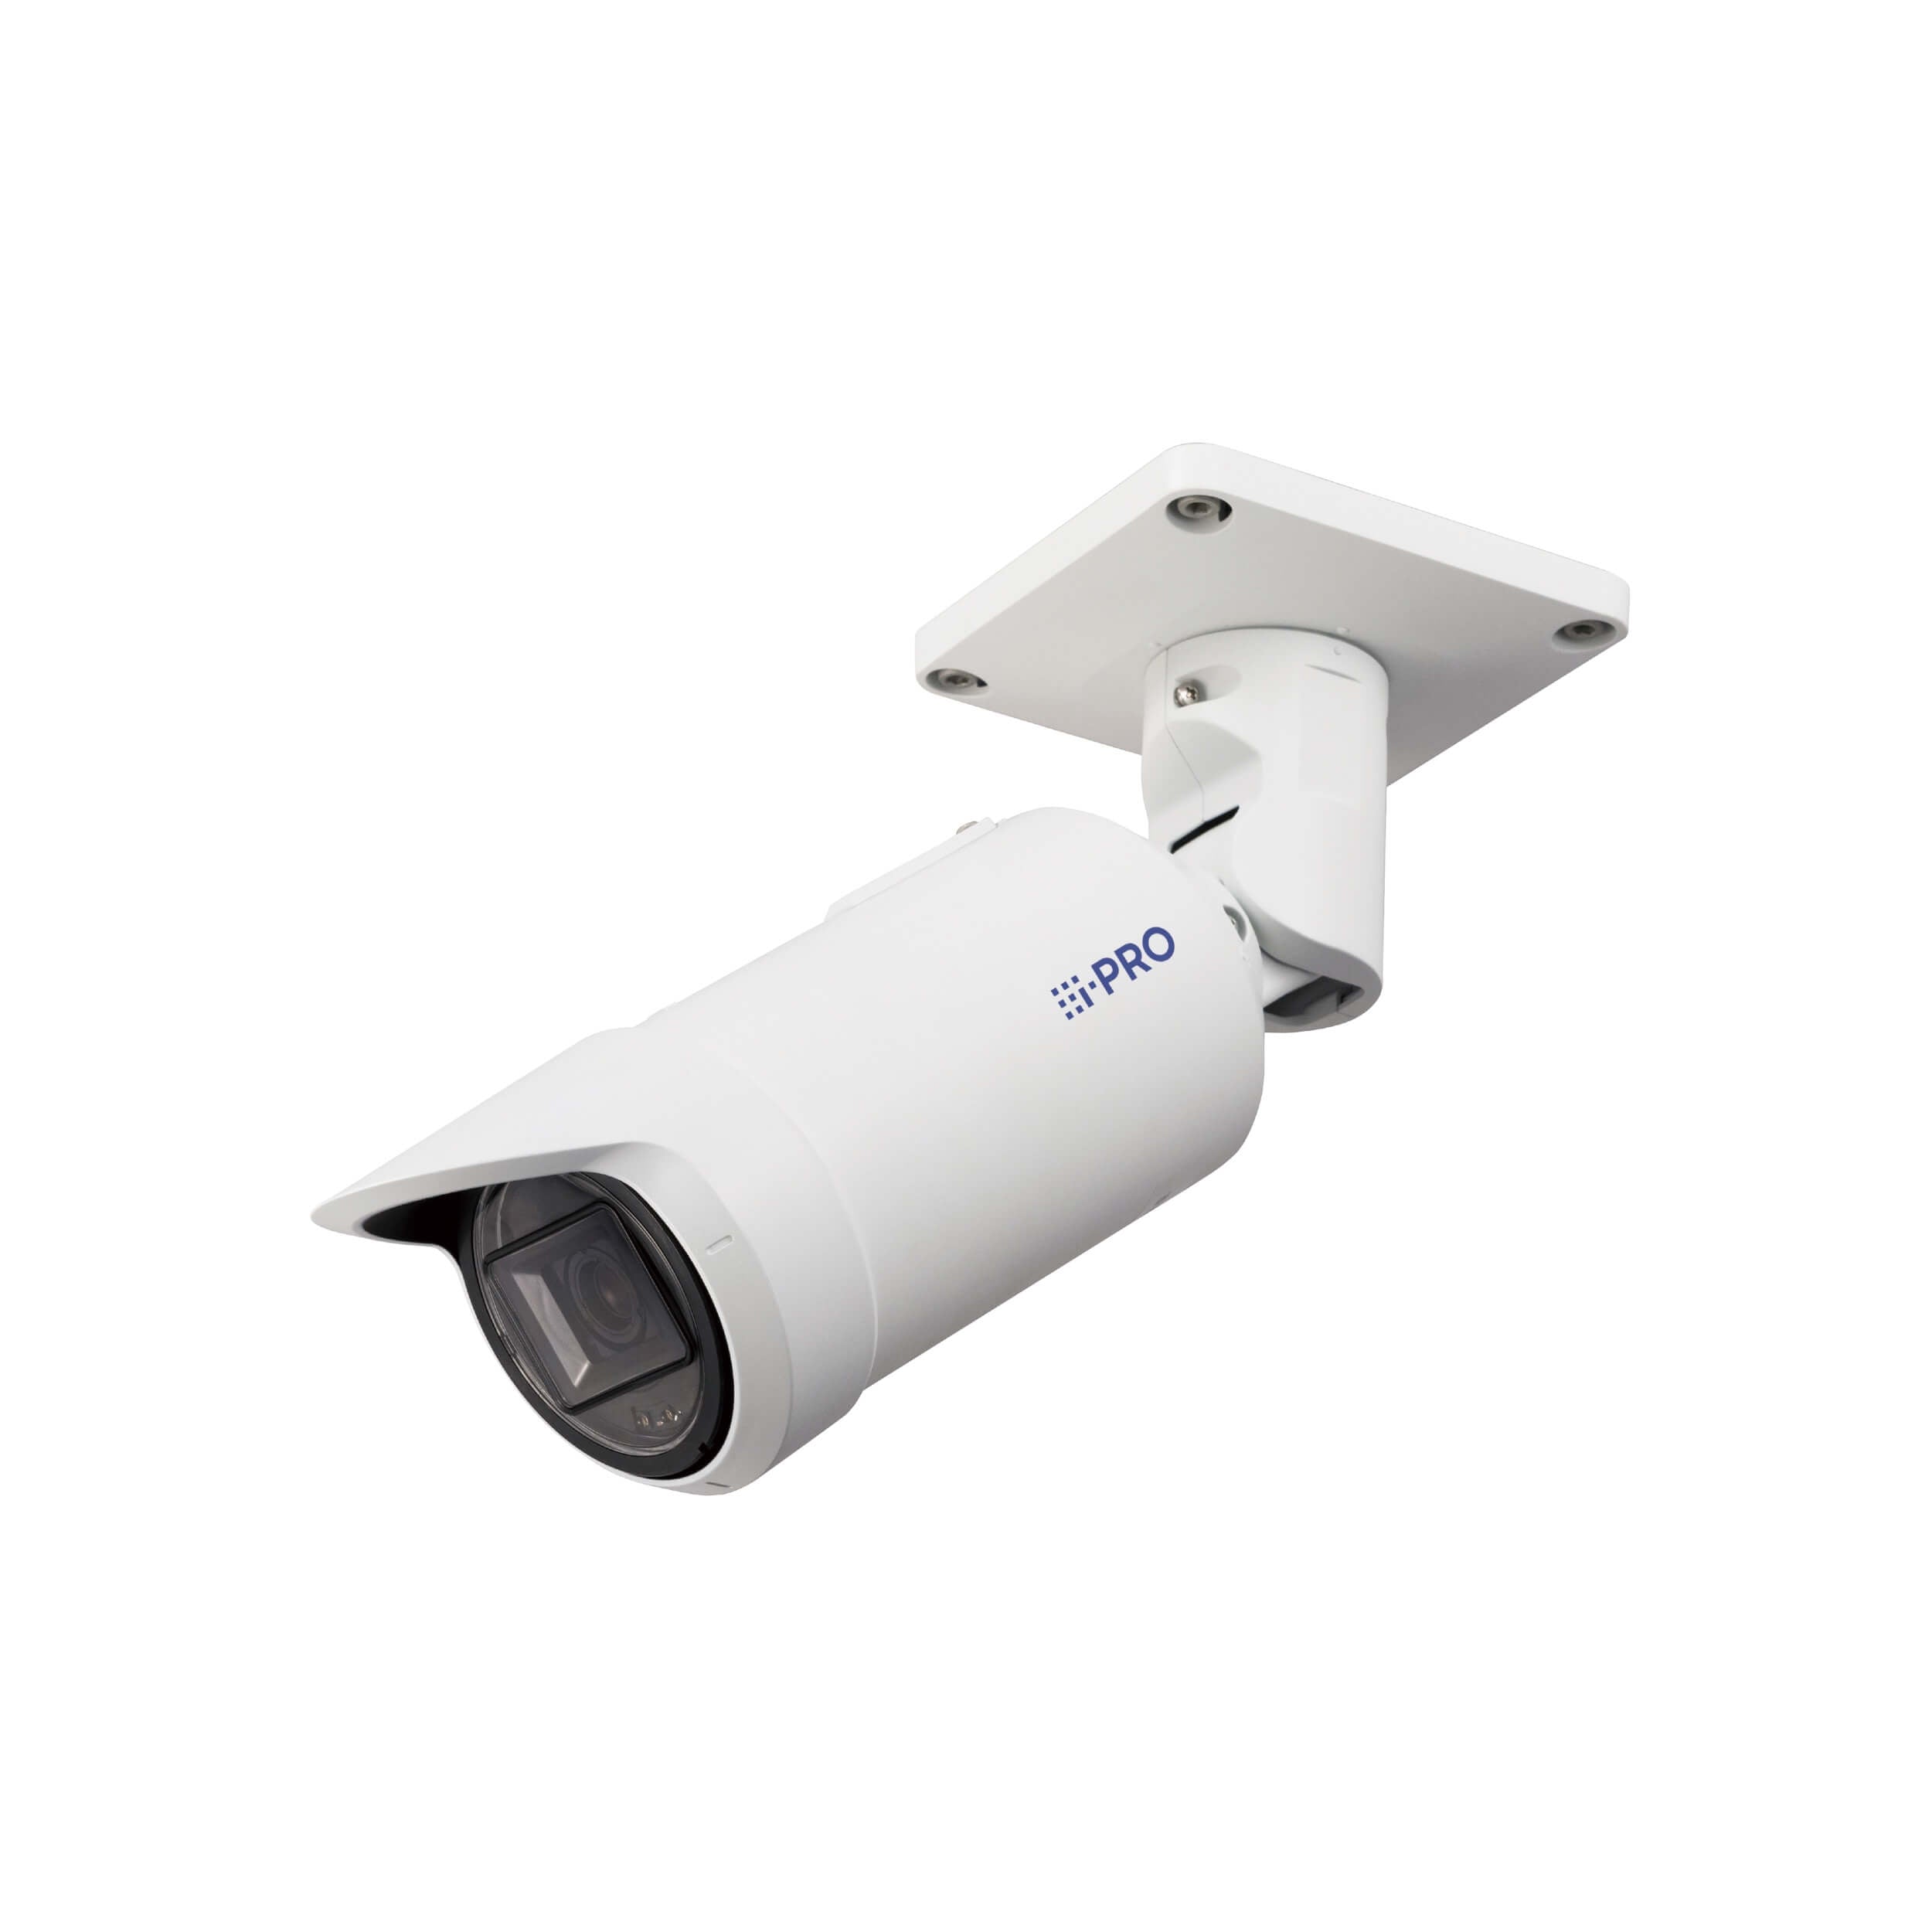 Panasonic WV-S15600-V2LN 6MP Outdoor Bullet Network Camera with AI Engine with 4.3-8.6mm Lens